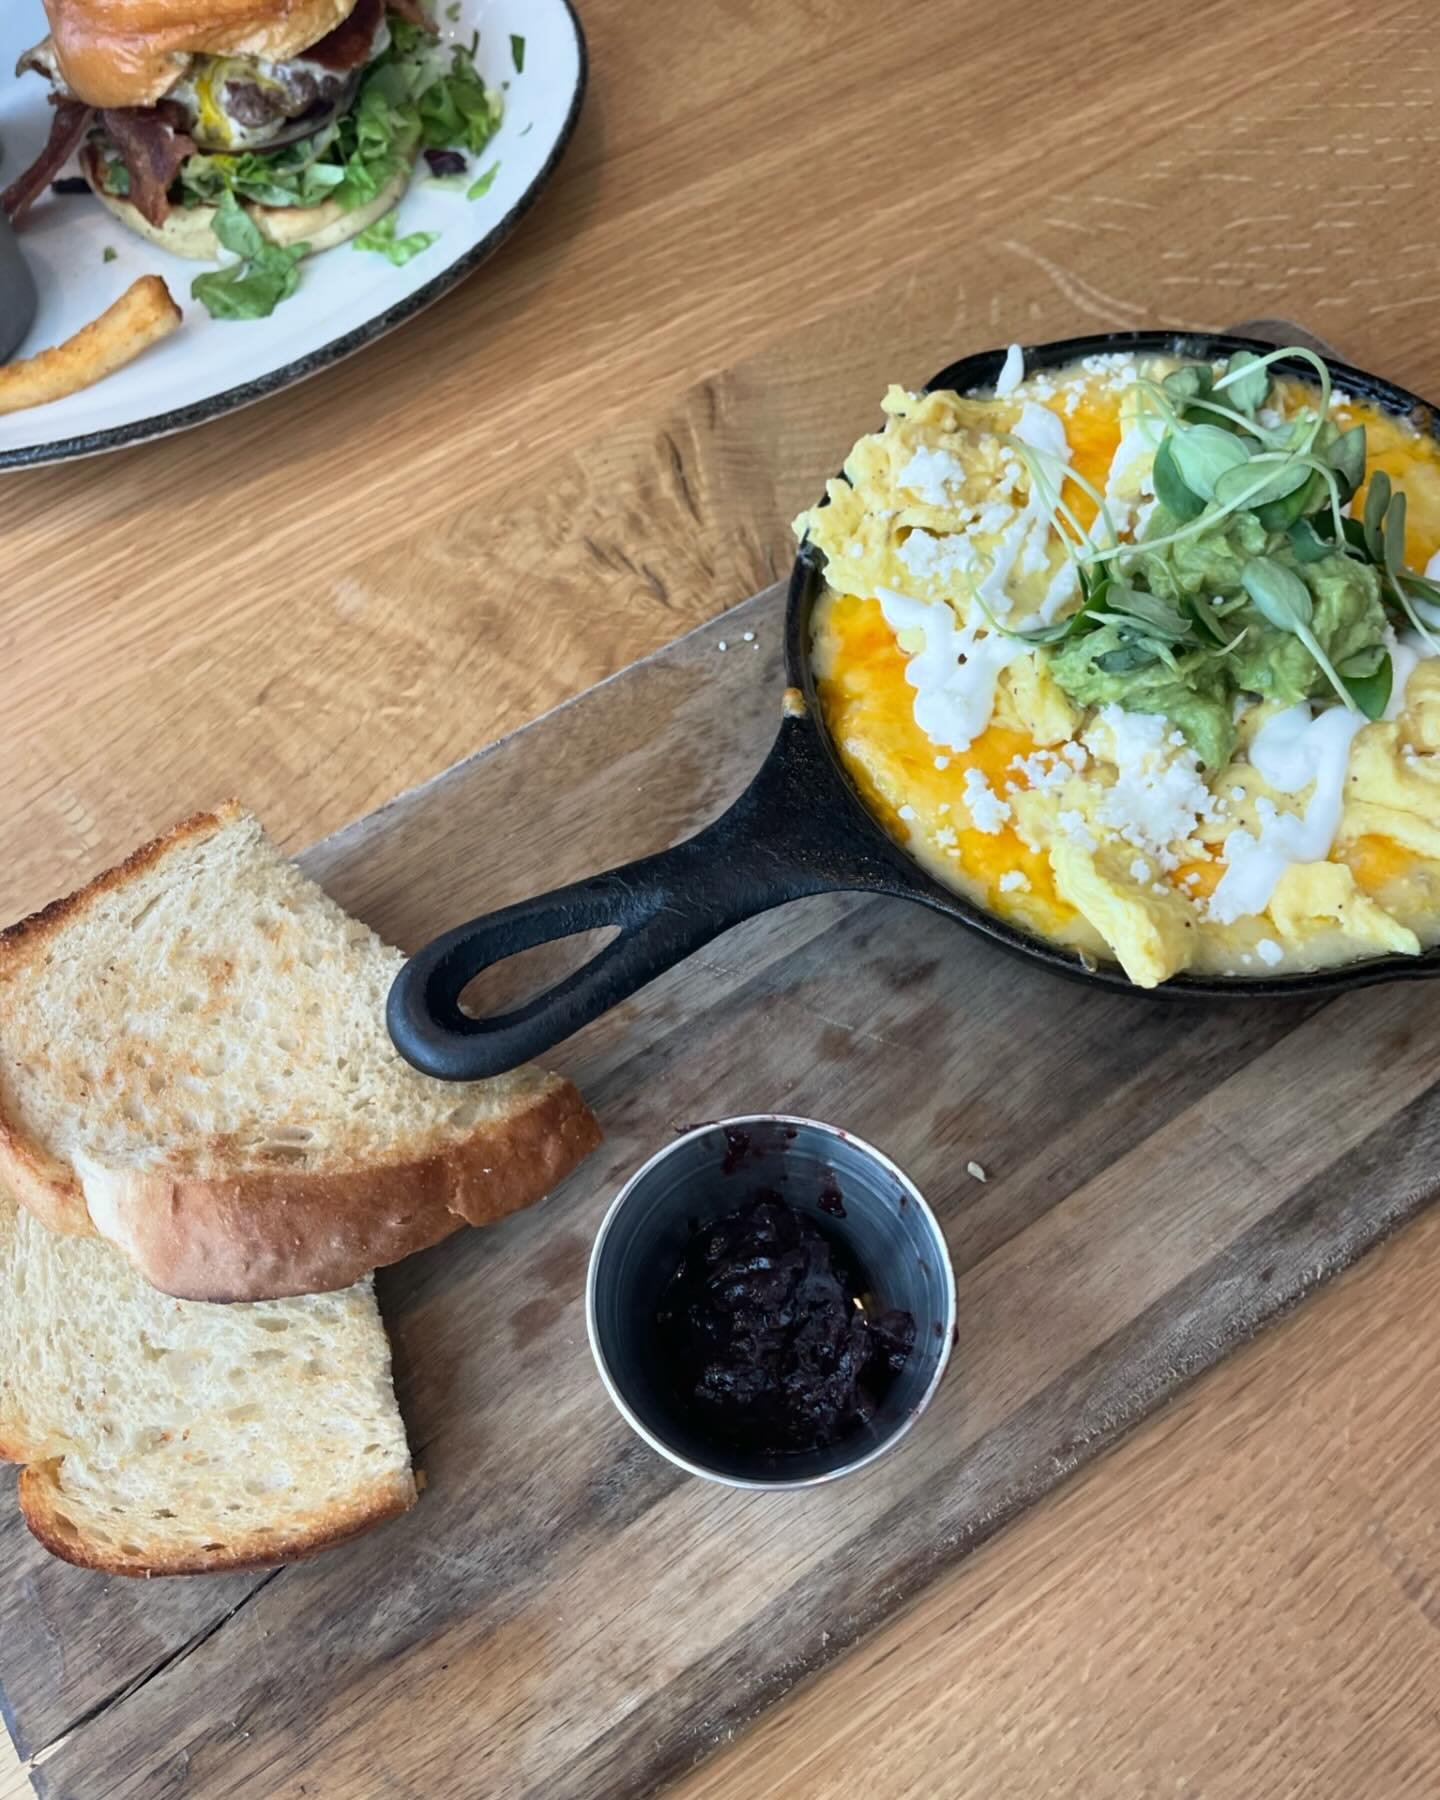 Let&rsquo;s talk brunch! Here&rsquo;s a locals guide on where to go for a leisurely late breakfast in Fredericksburg ☕️🥞

+ Hill &amp; Vine - delicious, southern style menu and great vibe
+ Rock Haus - best to grab coffee and ~pain au chocolate~ 🥐 